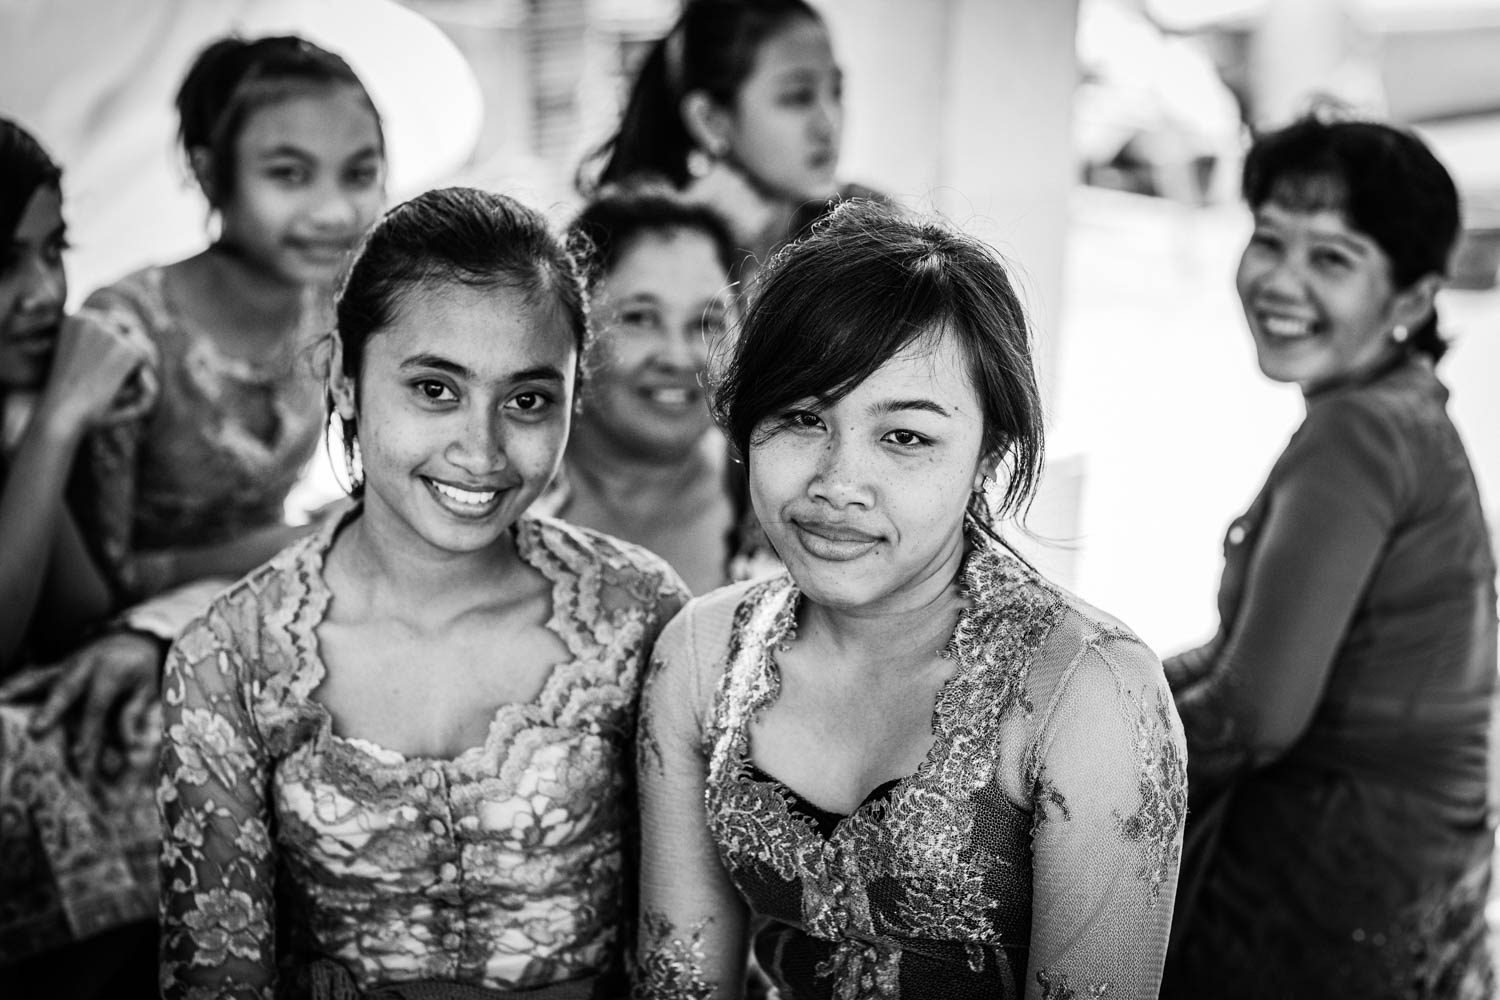 Cremation family portrait group of young women taken in Bali